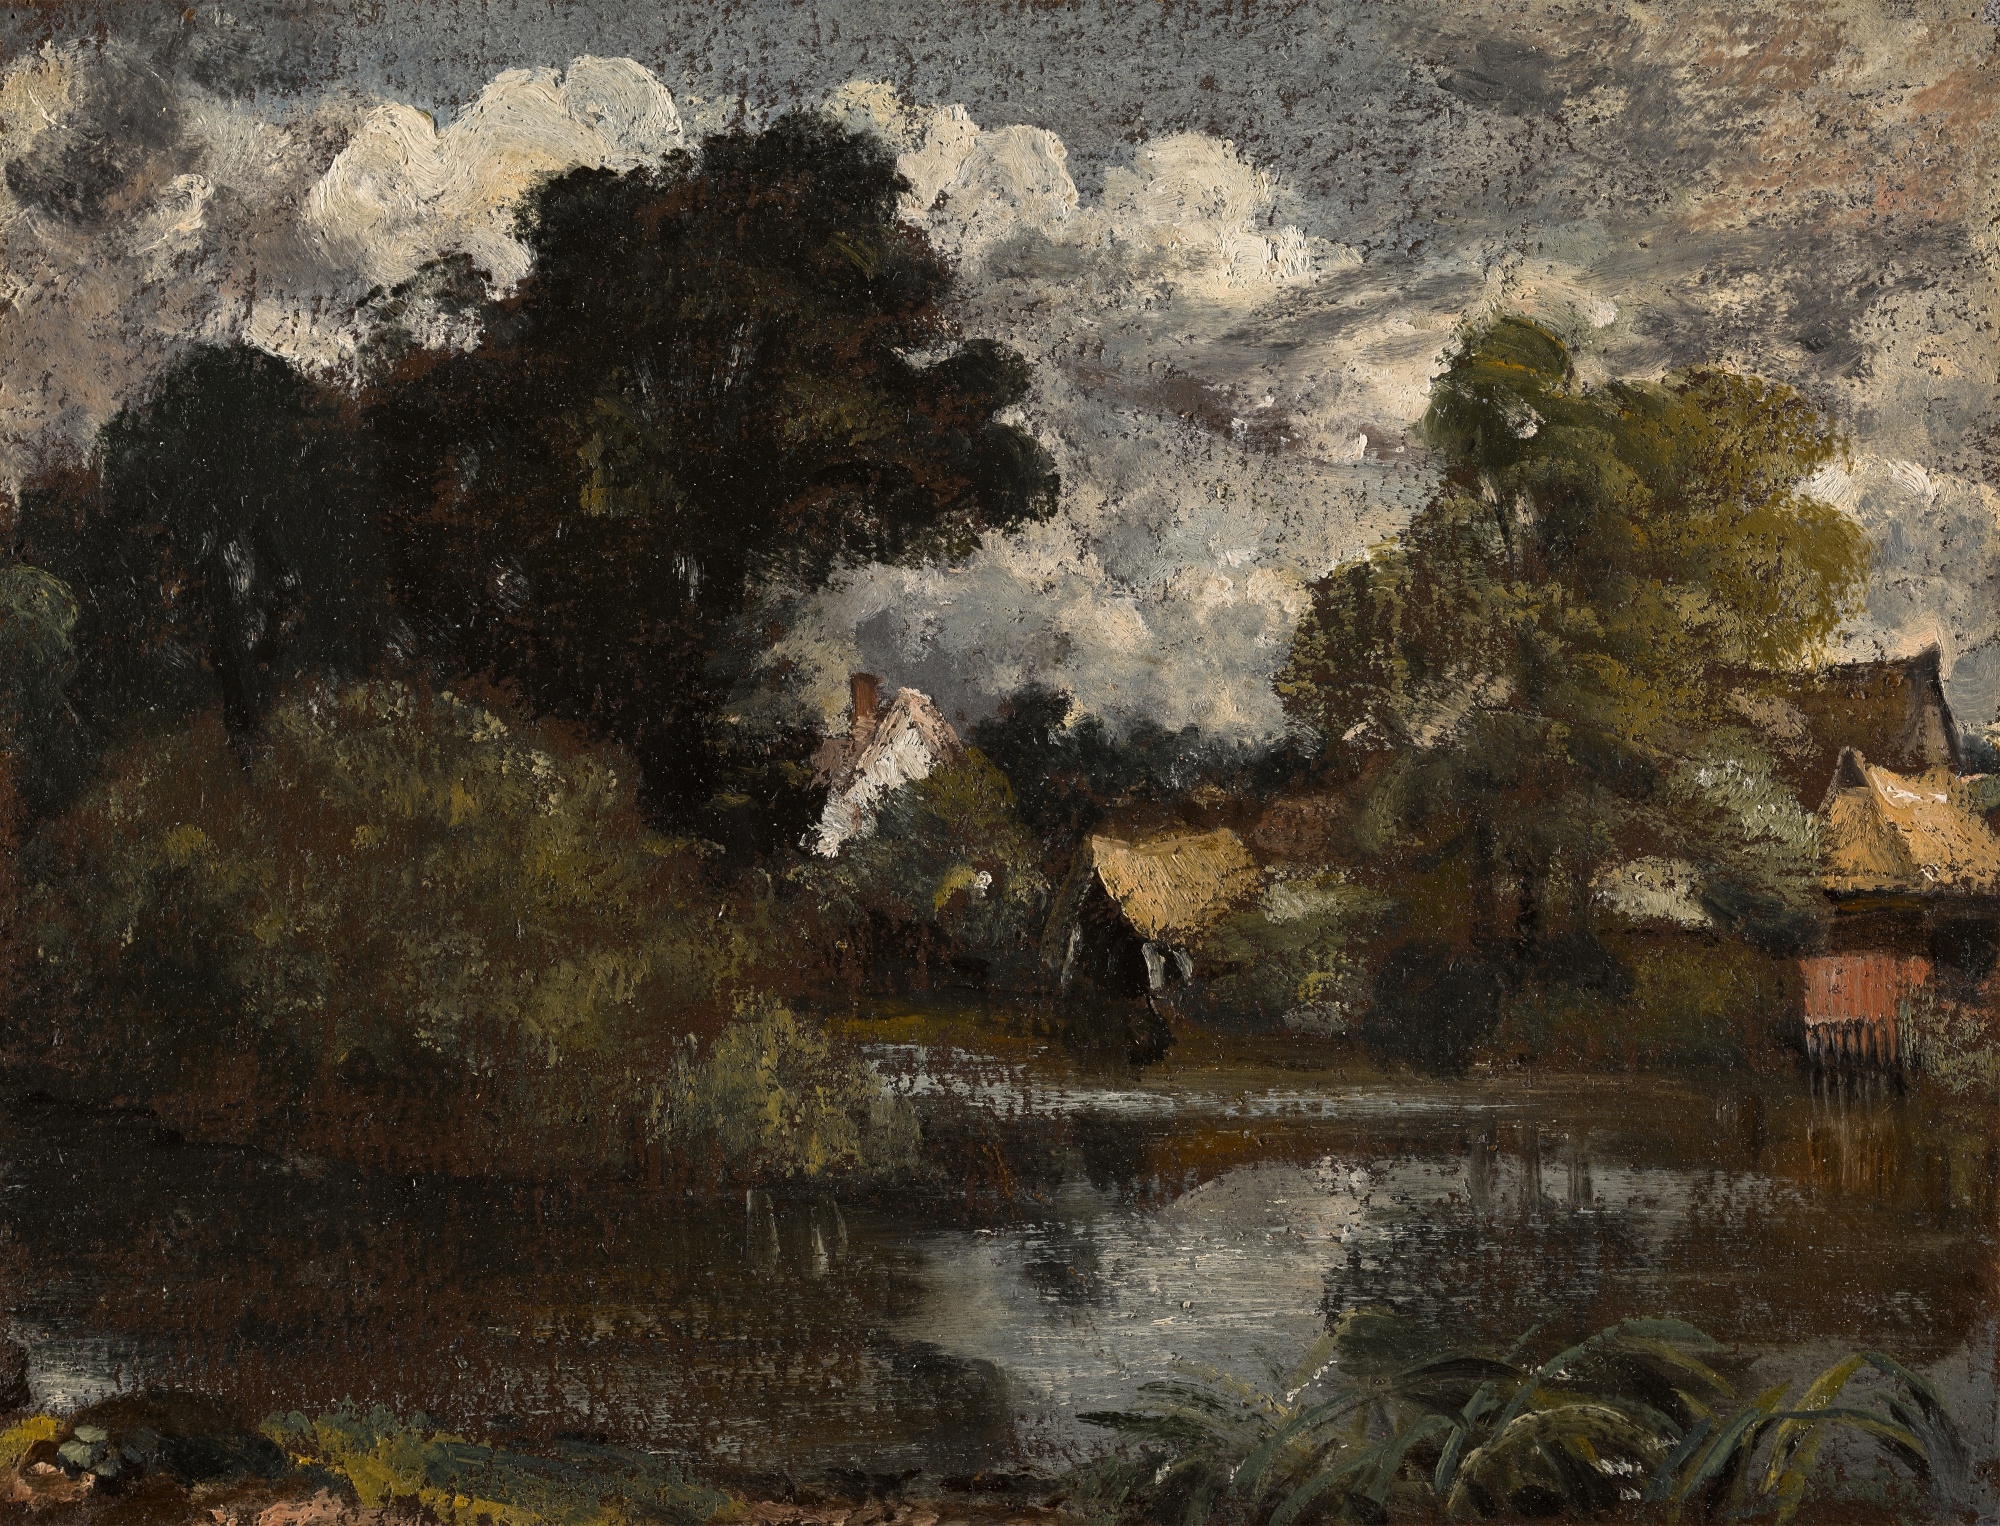 Artwork by John Constable, Study for the White Horse, Made of oil on board